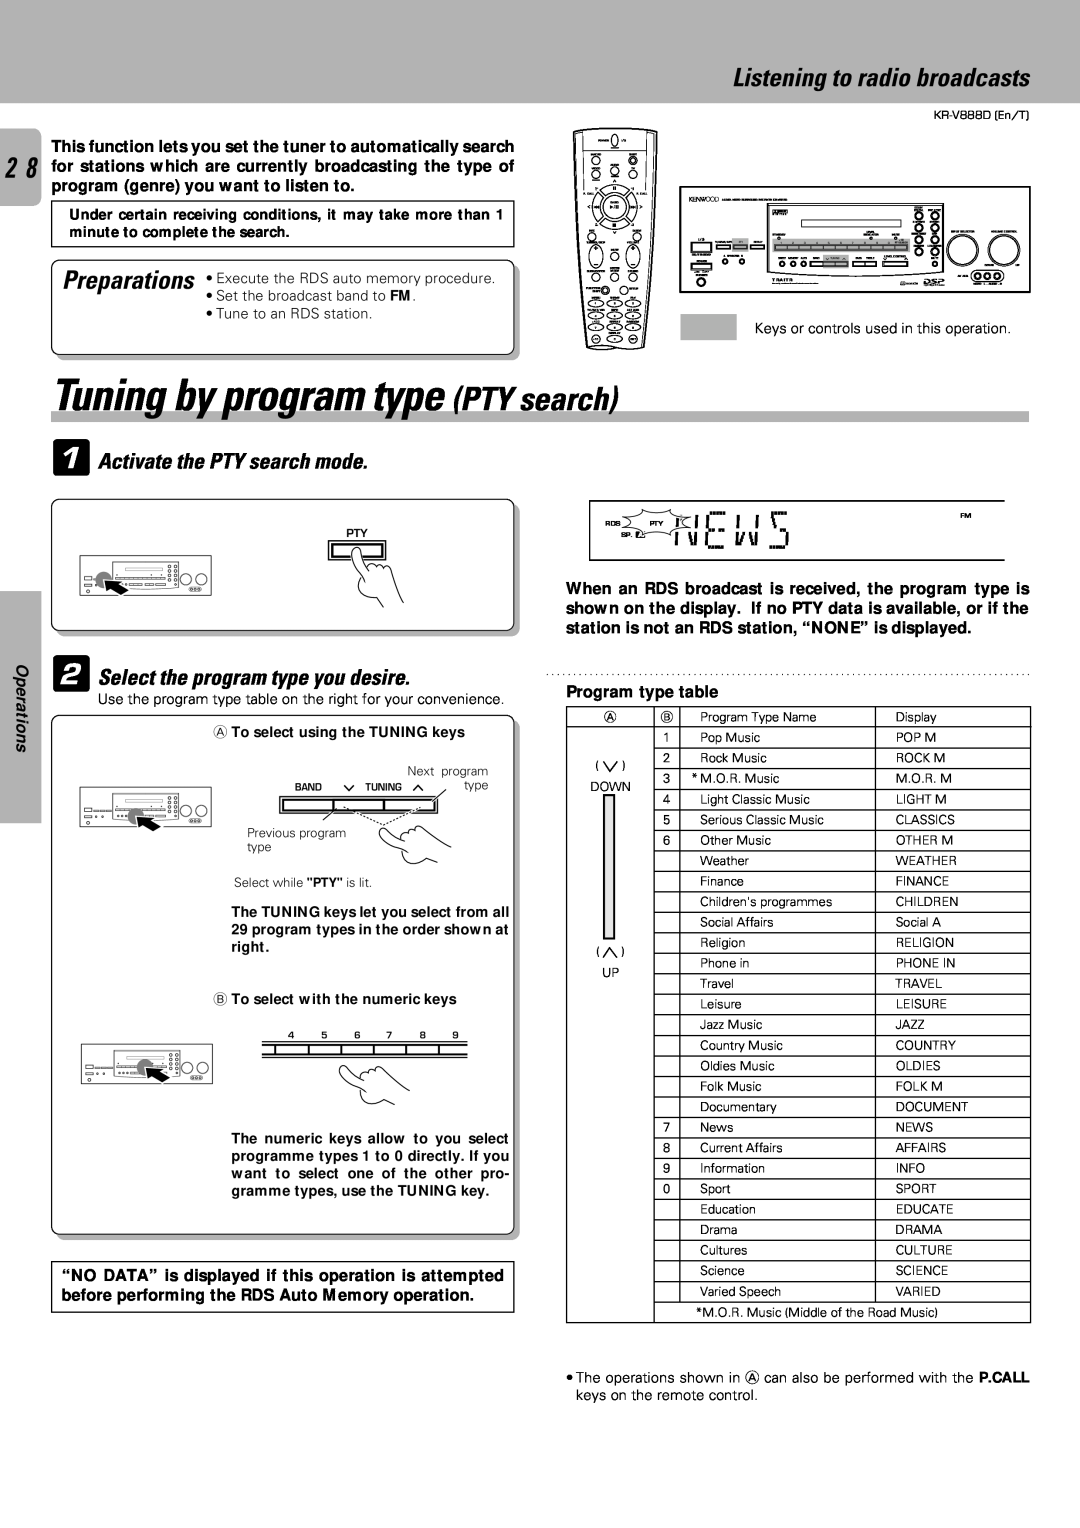 Kenwood KR-V888D NEWs, Tuning by program type PTY search, 1Activate the PTY search mode, Listening to radio broadcasts 